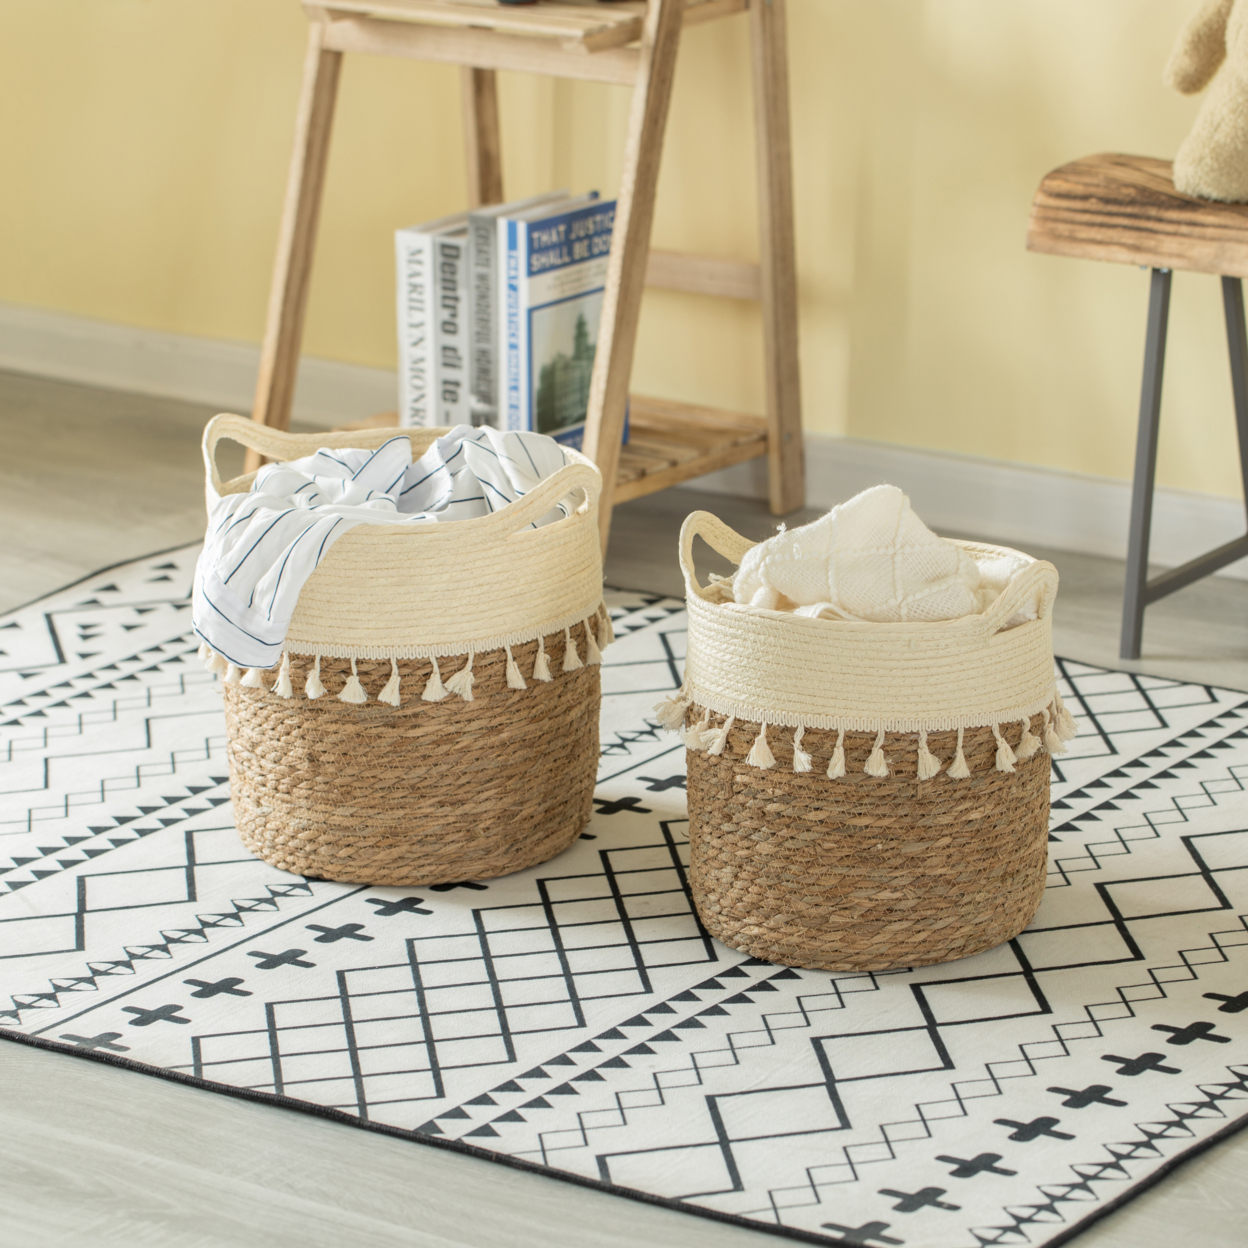 Decorative Round Storage Basket Set Of 2 With Woven Handles For The Playroom, Bedroom, And Living Room